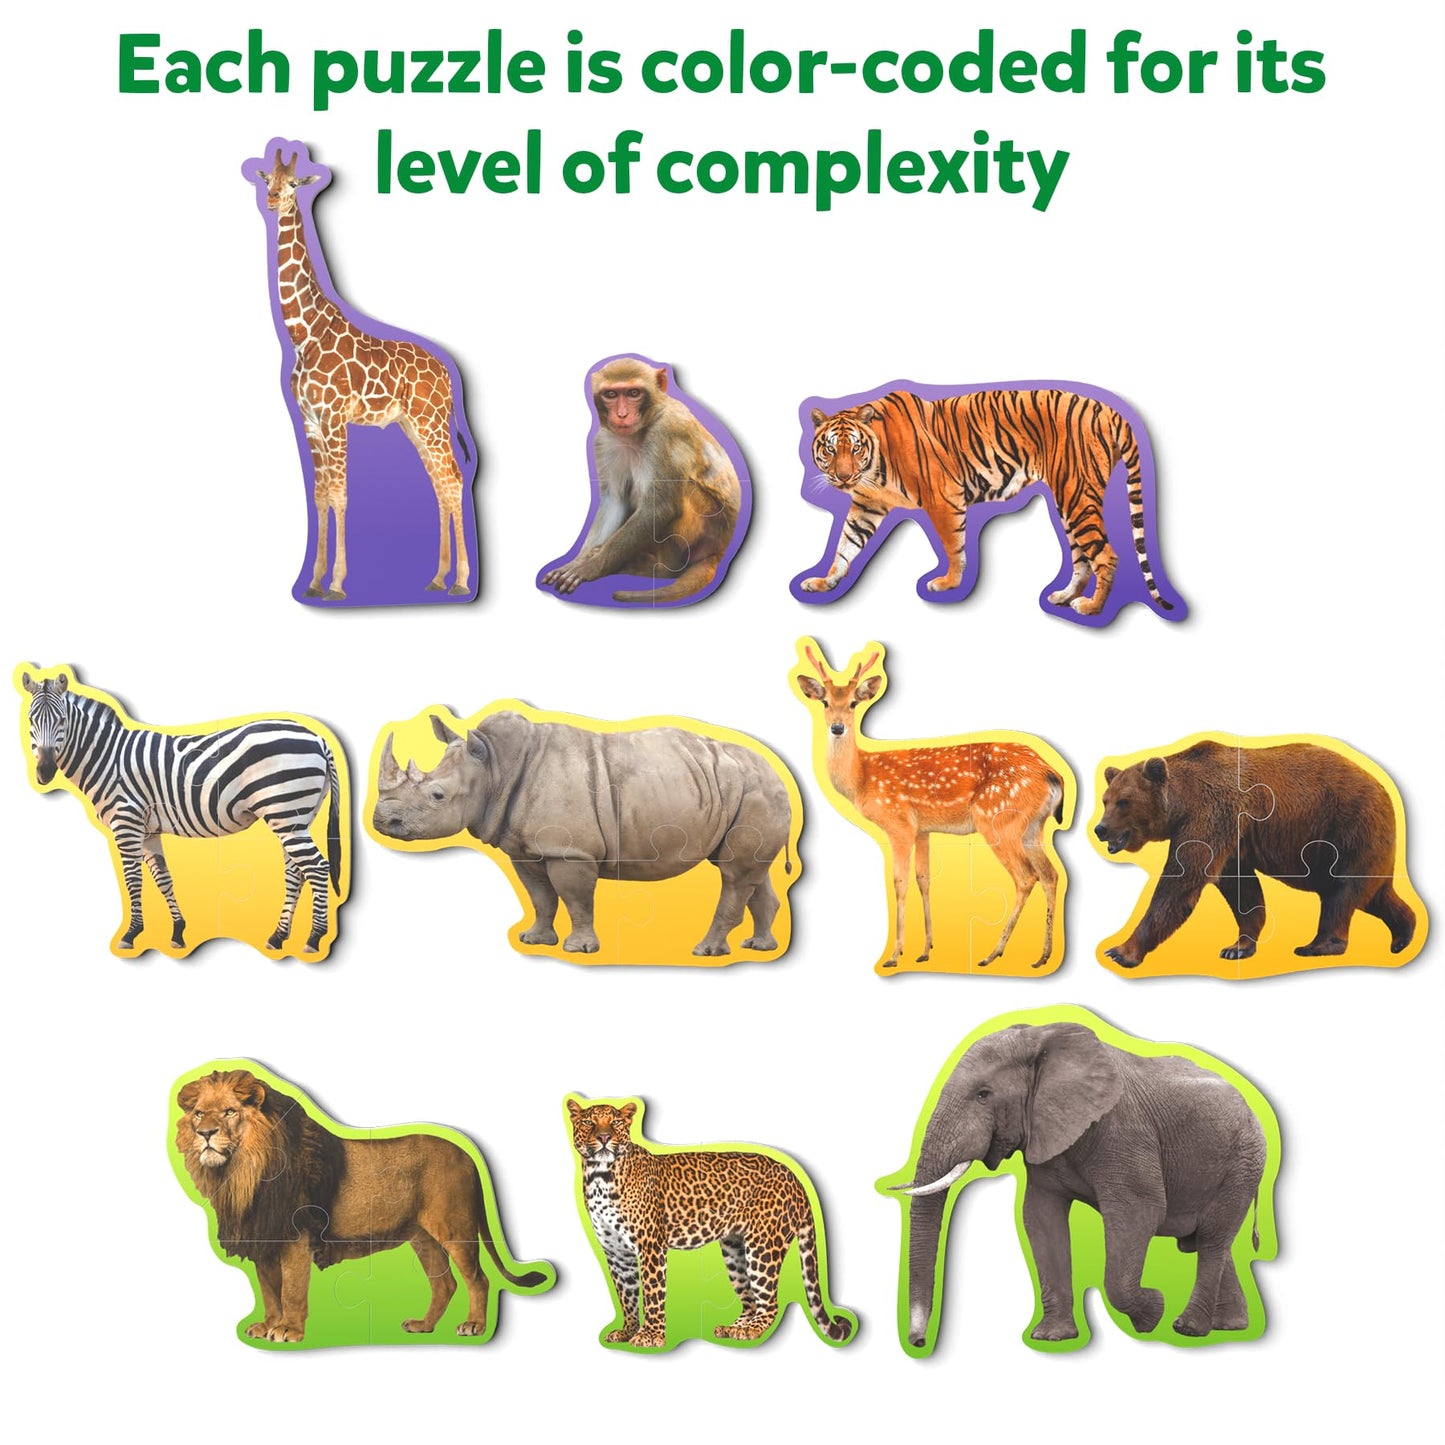 Skillmatics Step by Step Puzzle - 40 Piece Wild Animal Jigsaw & Toddler Puzzles, Educational Montessori Toy, Gifts for Kids Ages 3, 4, 5 and Up